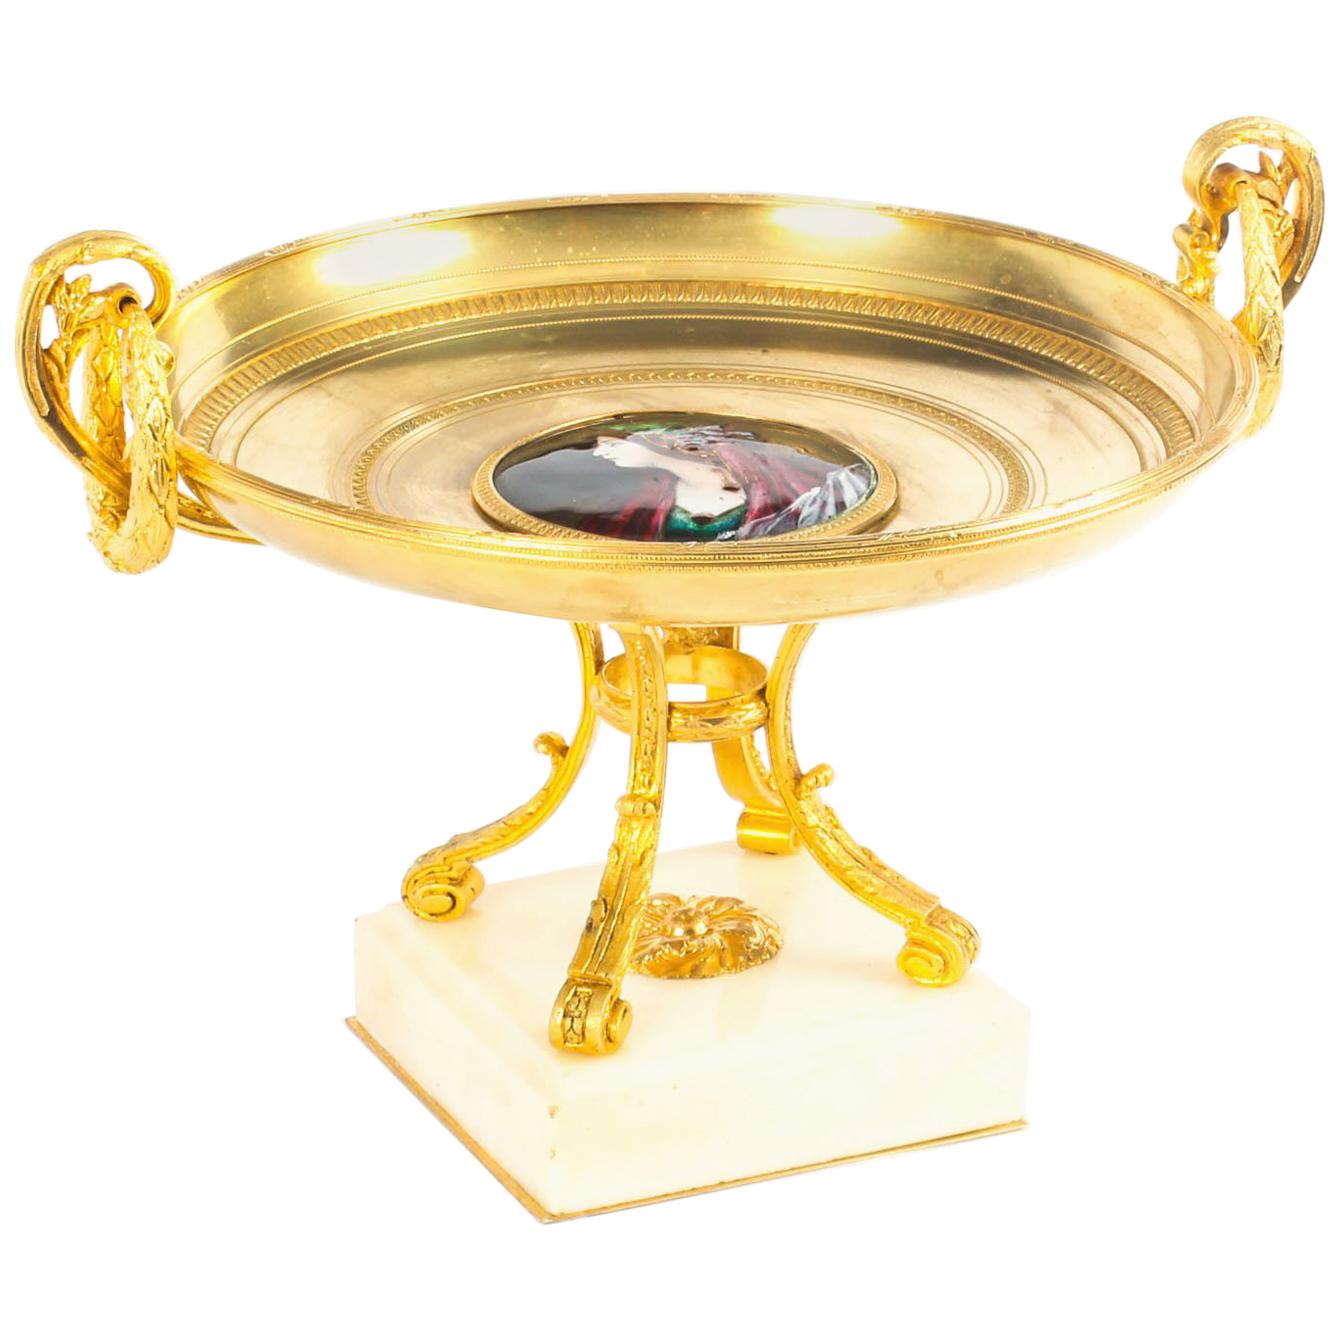 Antique French Ormolu Tazza with Limoges Enamel Plaque, 19th Century For Sale